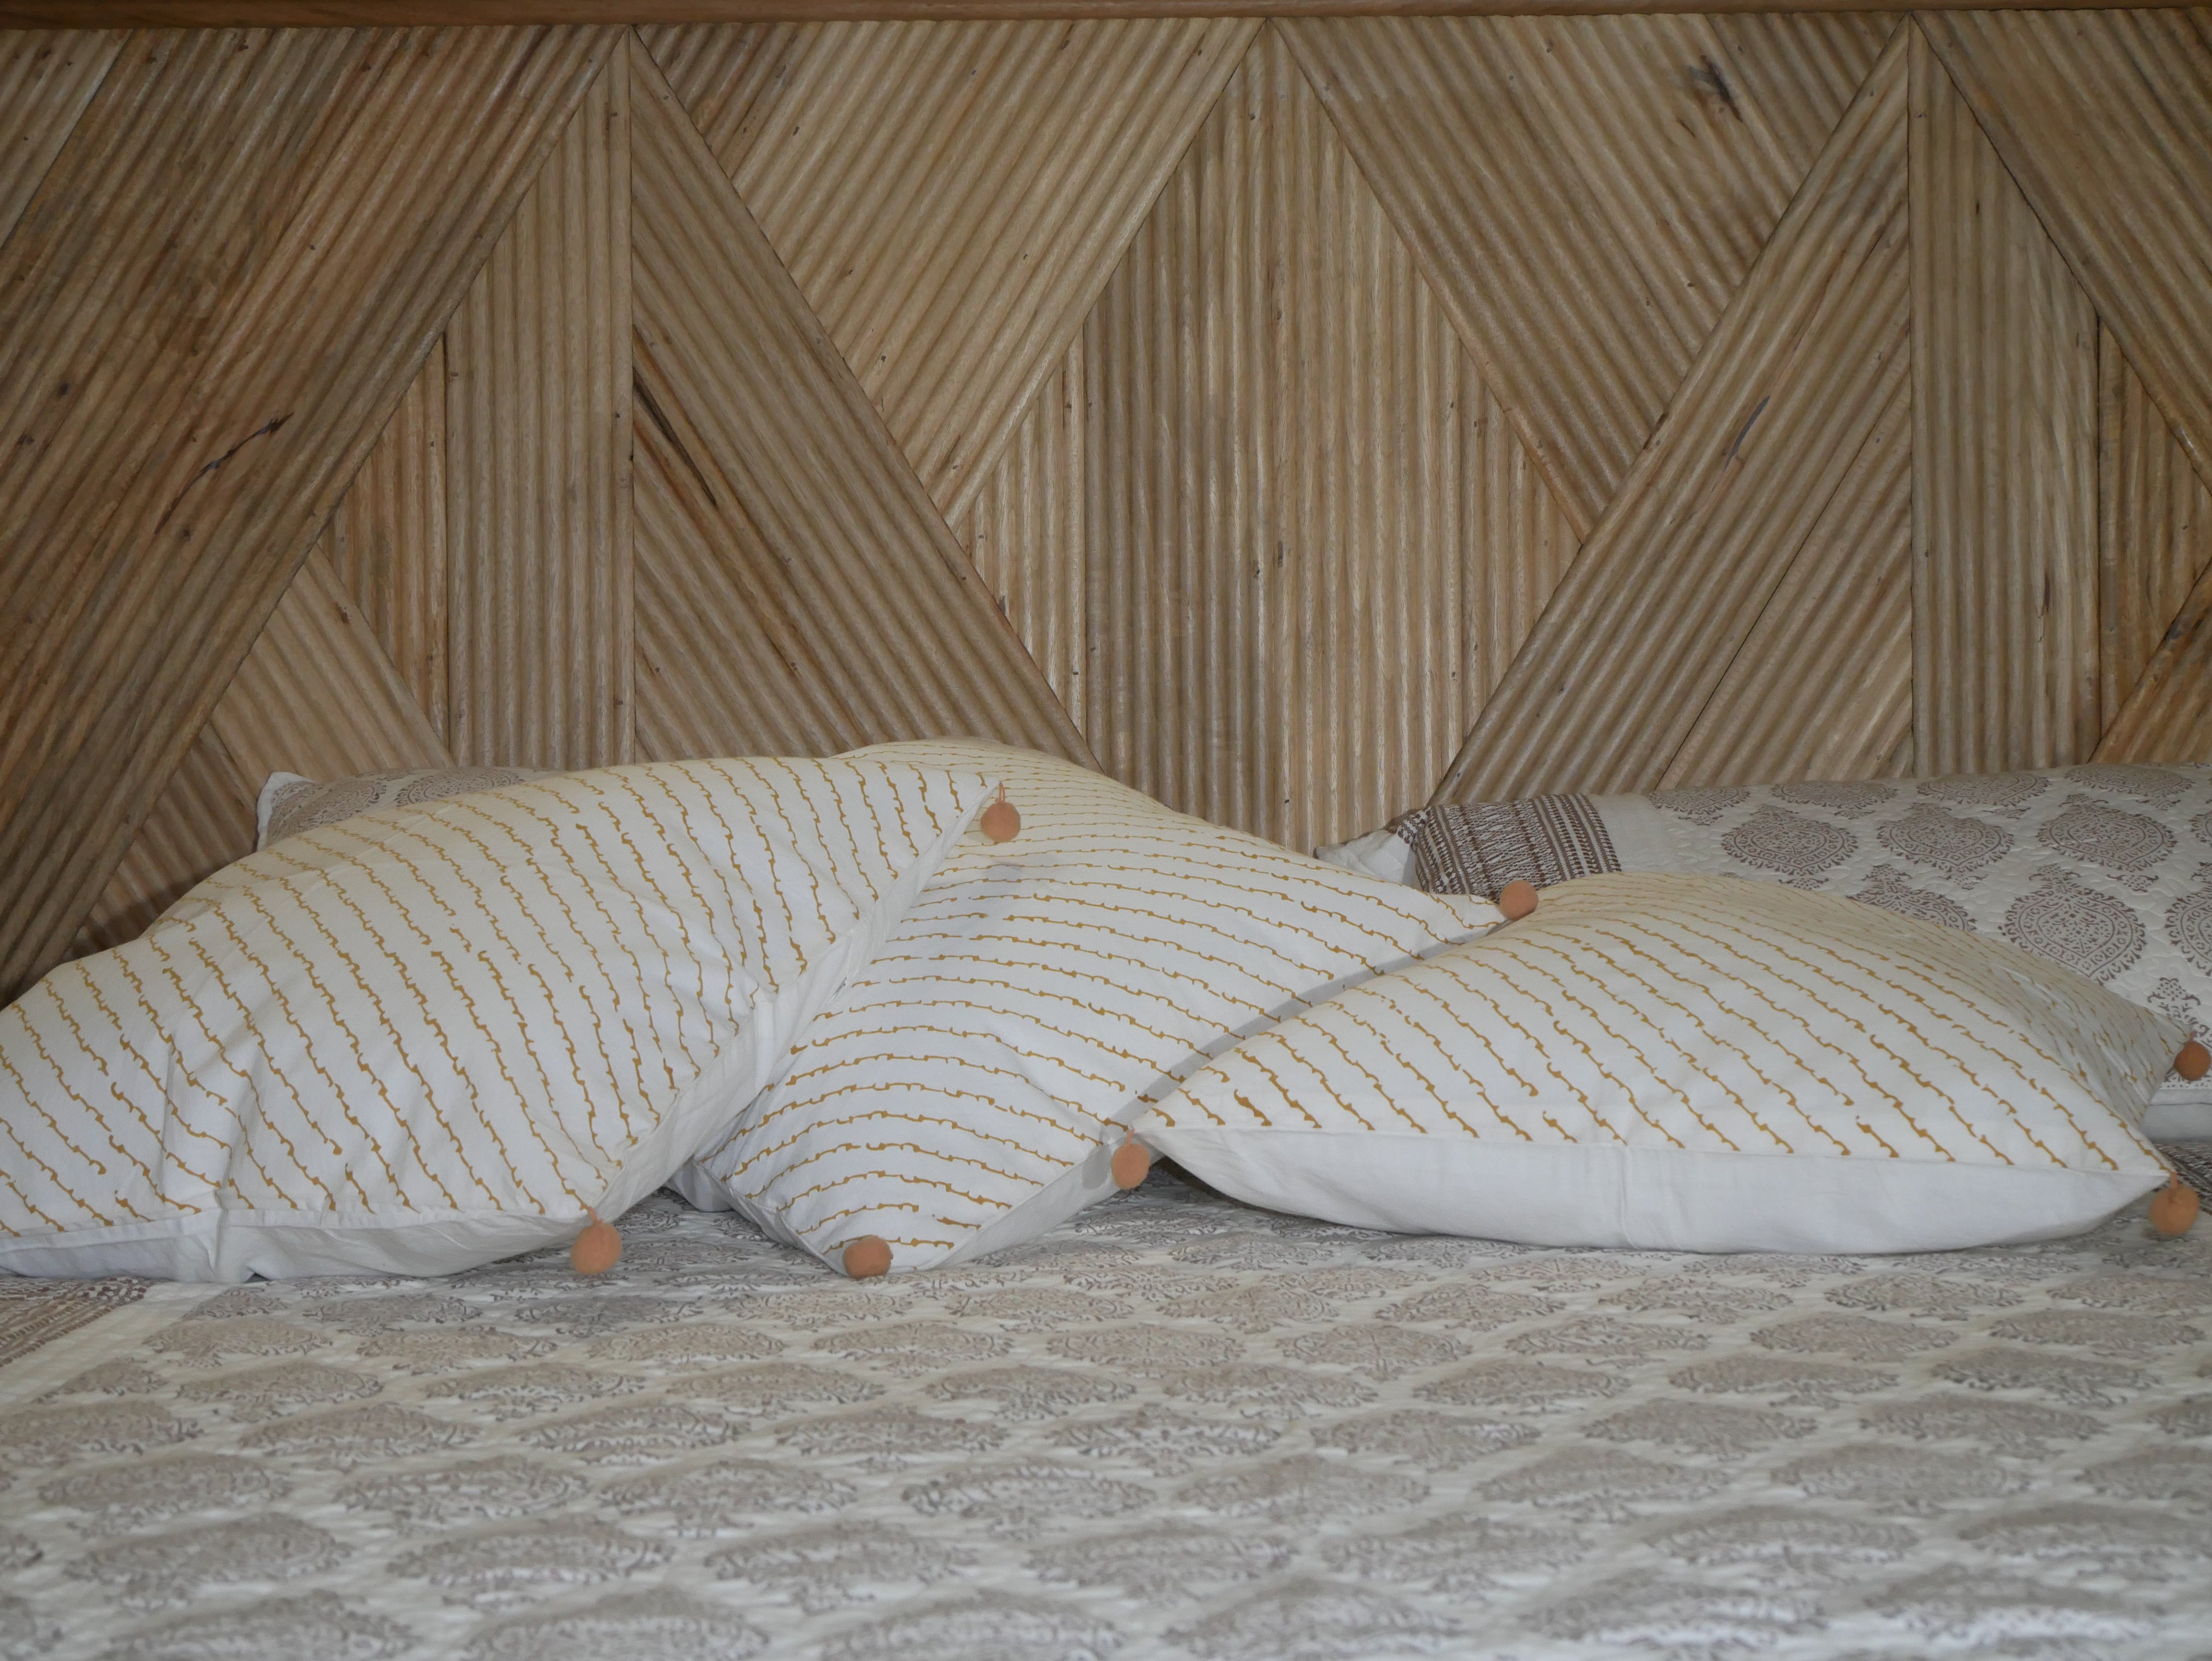 Beach, vintage wooden panel bed